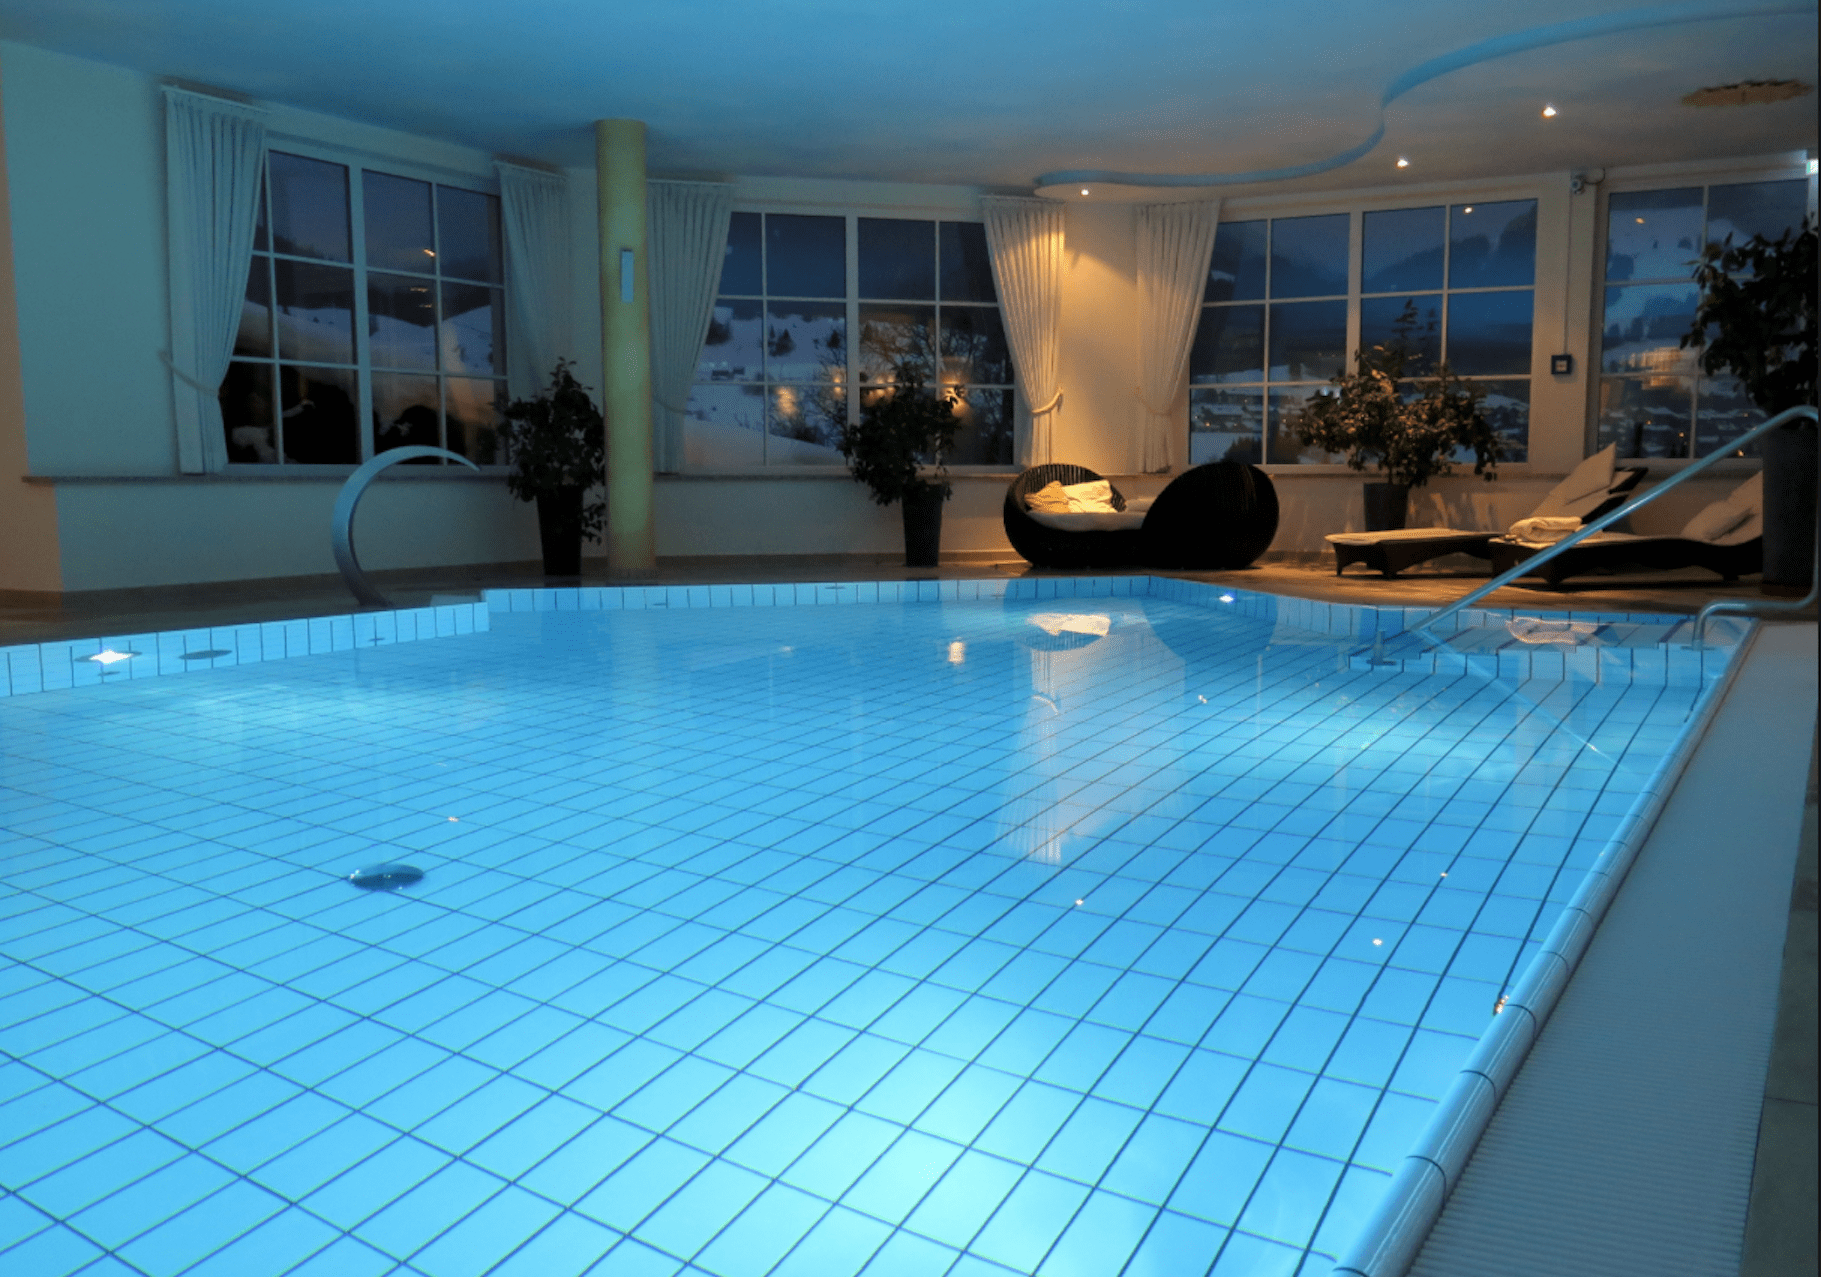 5 Indoor Pool Problems &  How to Avoid Them